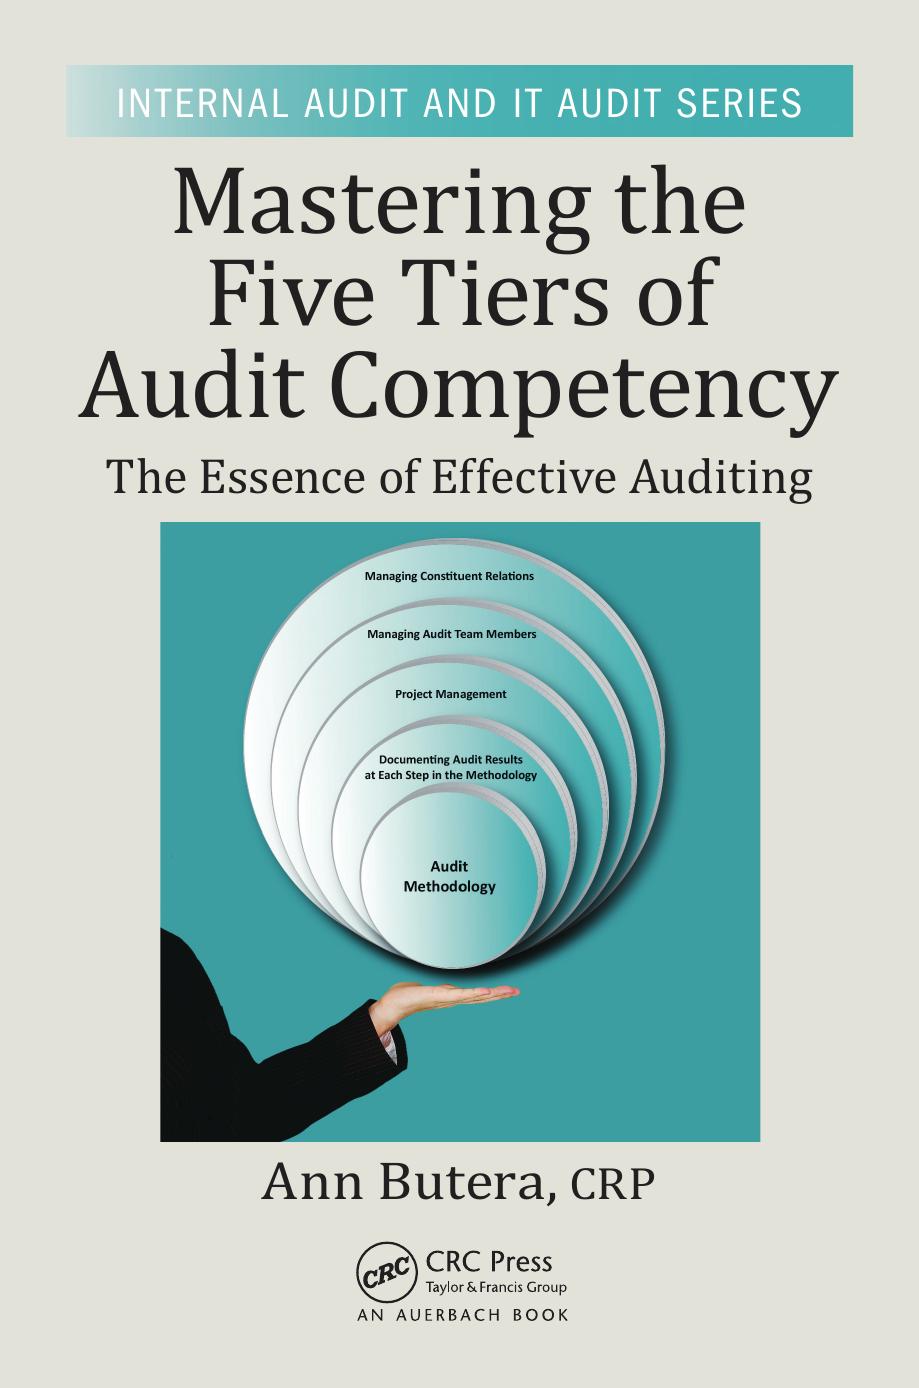 Mastering the Five Tiers of Audit Competency